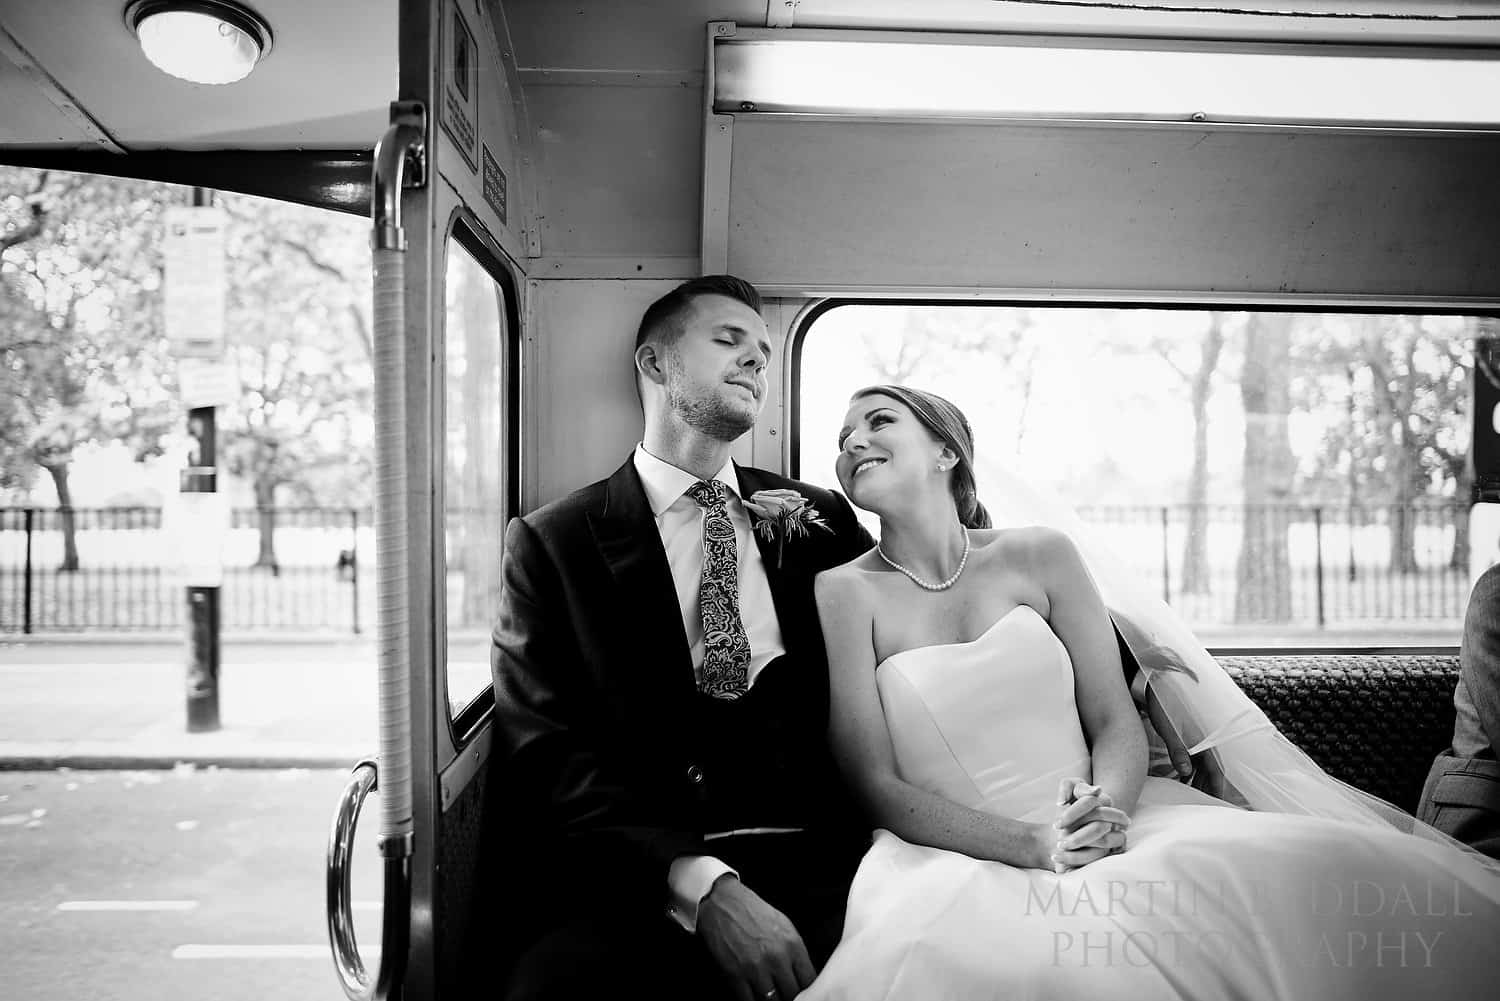 Just married and sat on the bus